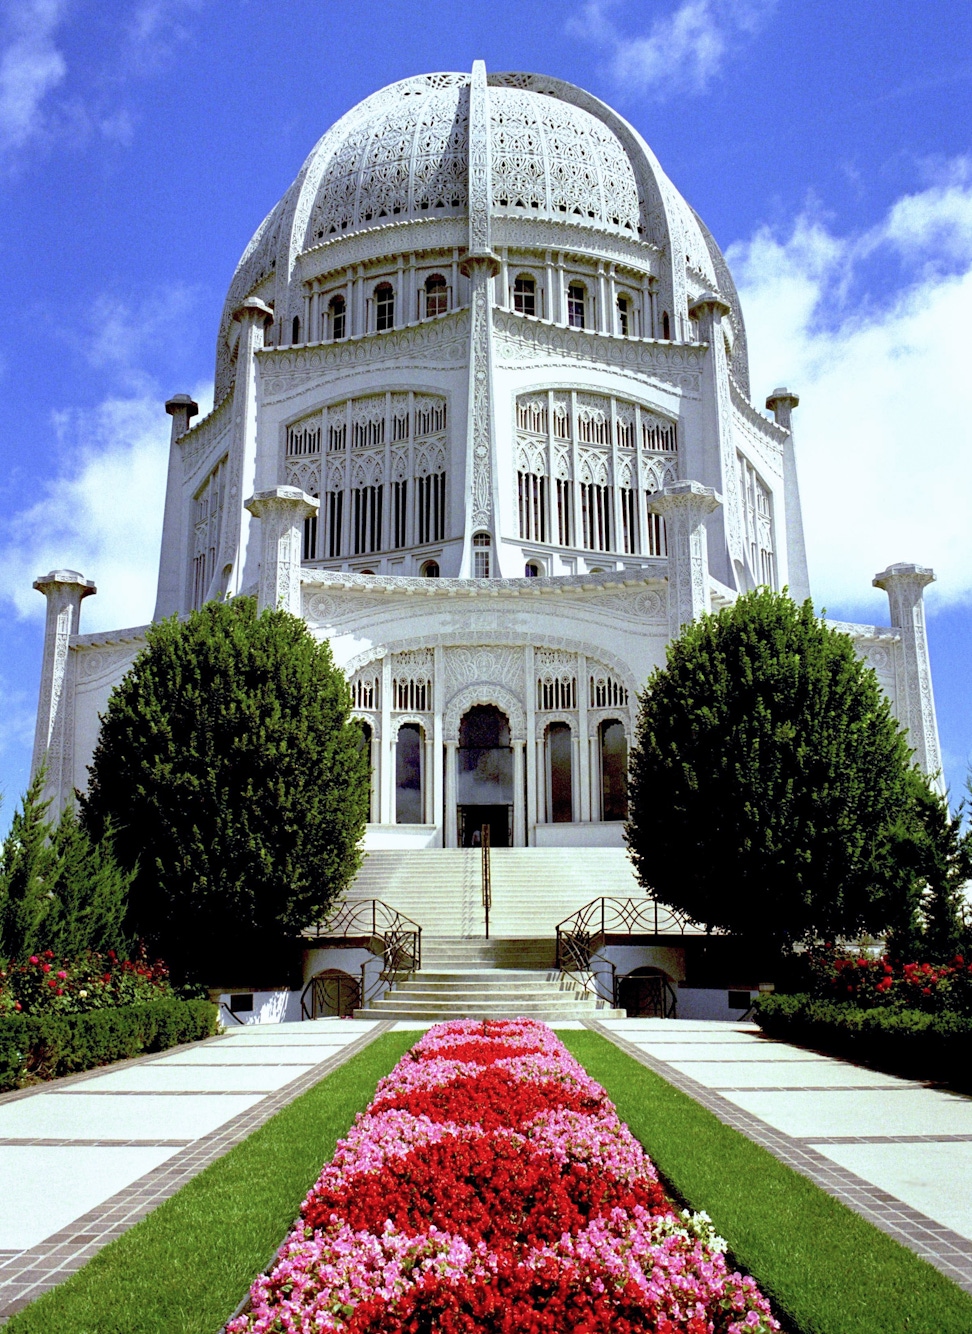 Continental Bahá’í House of Worship of North America (Wilmette, United States)